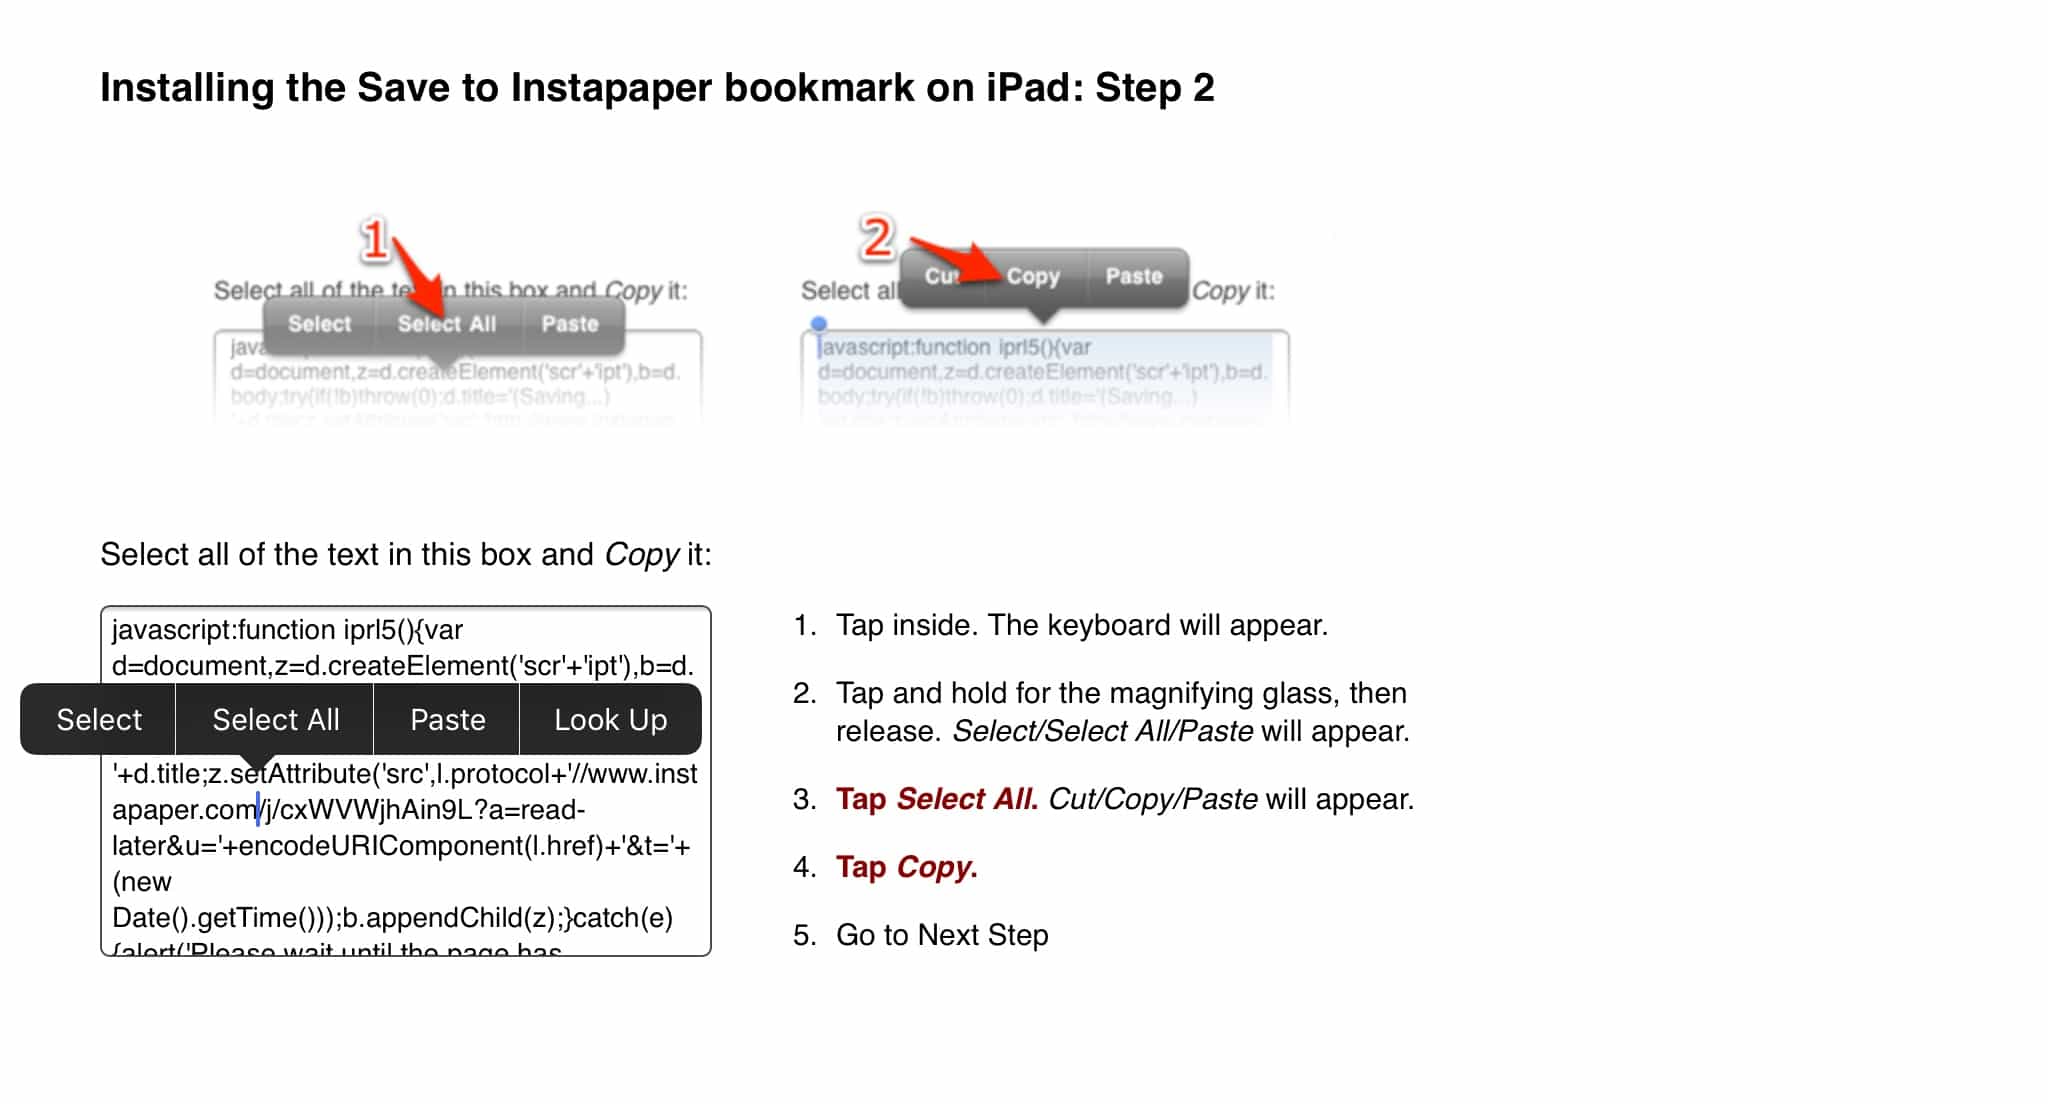 Instapaper makes it easy to copy the Javascript you need.